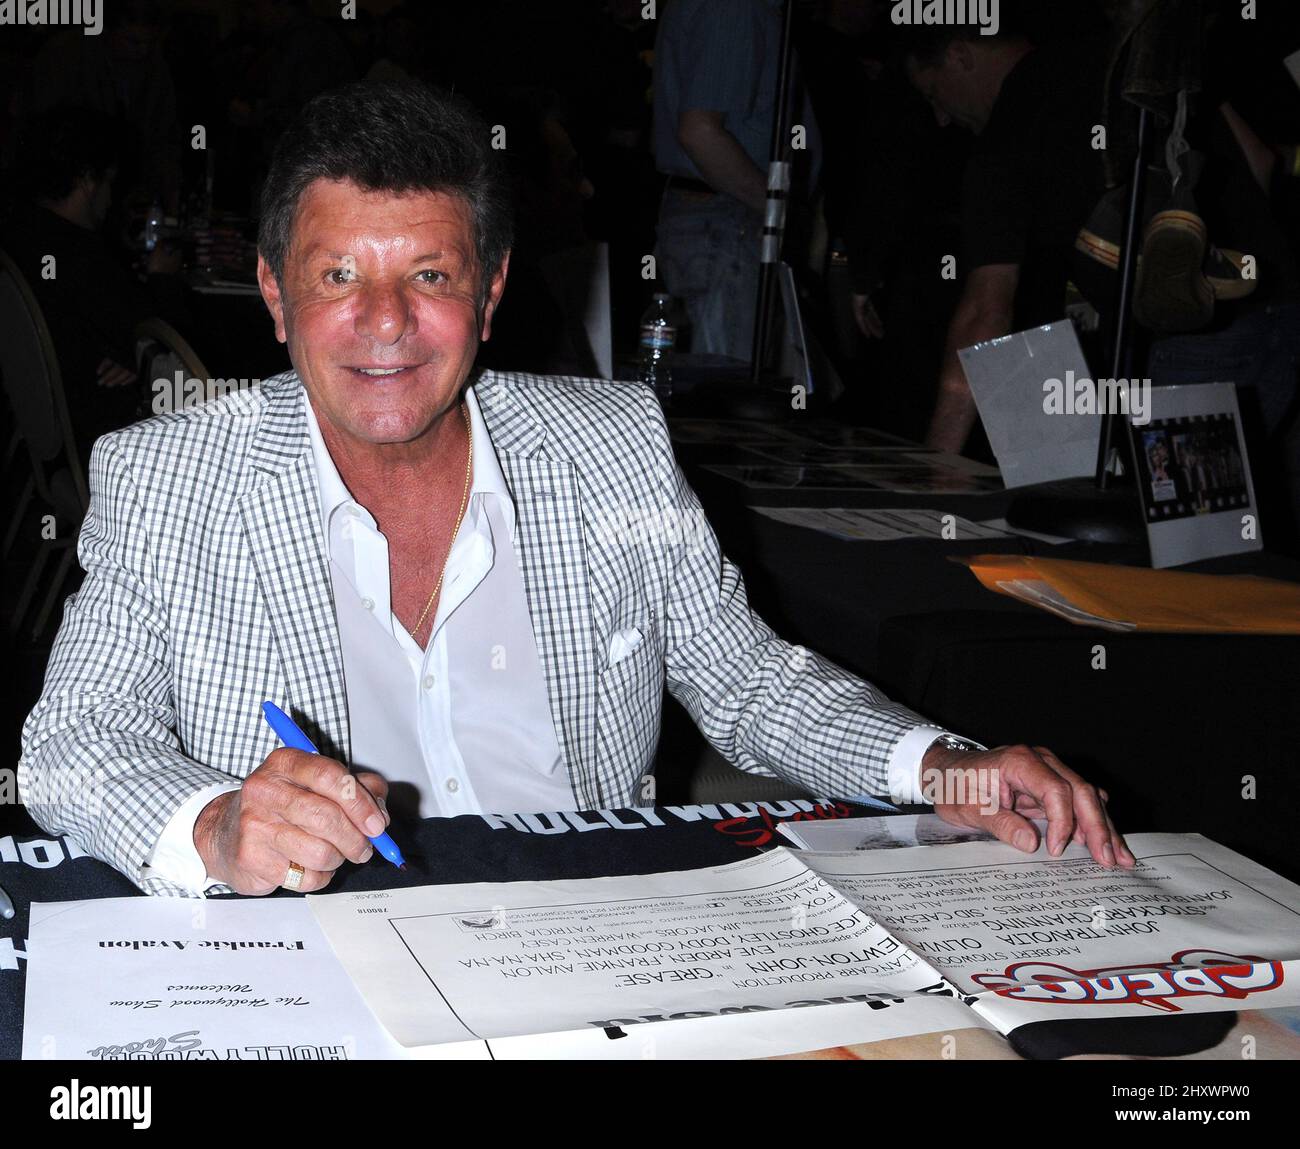 Frankie Avalon during The Hollywood Show, Fall 2011, held at the Burbank Airport Marriott Hotel & Convention Center, California Stock Photo